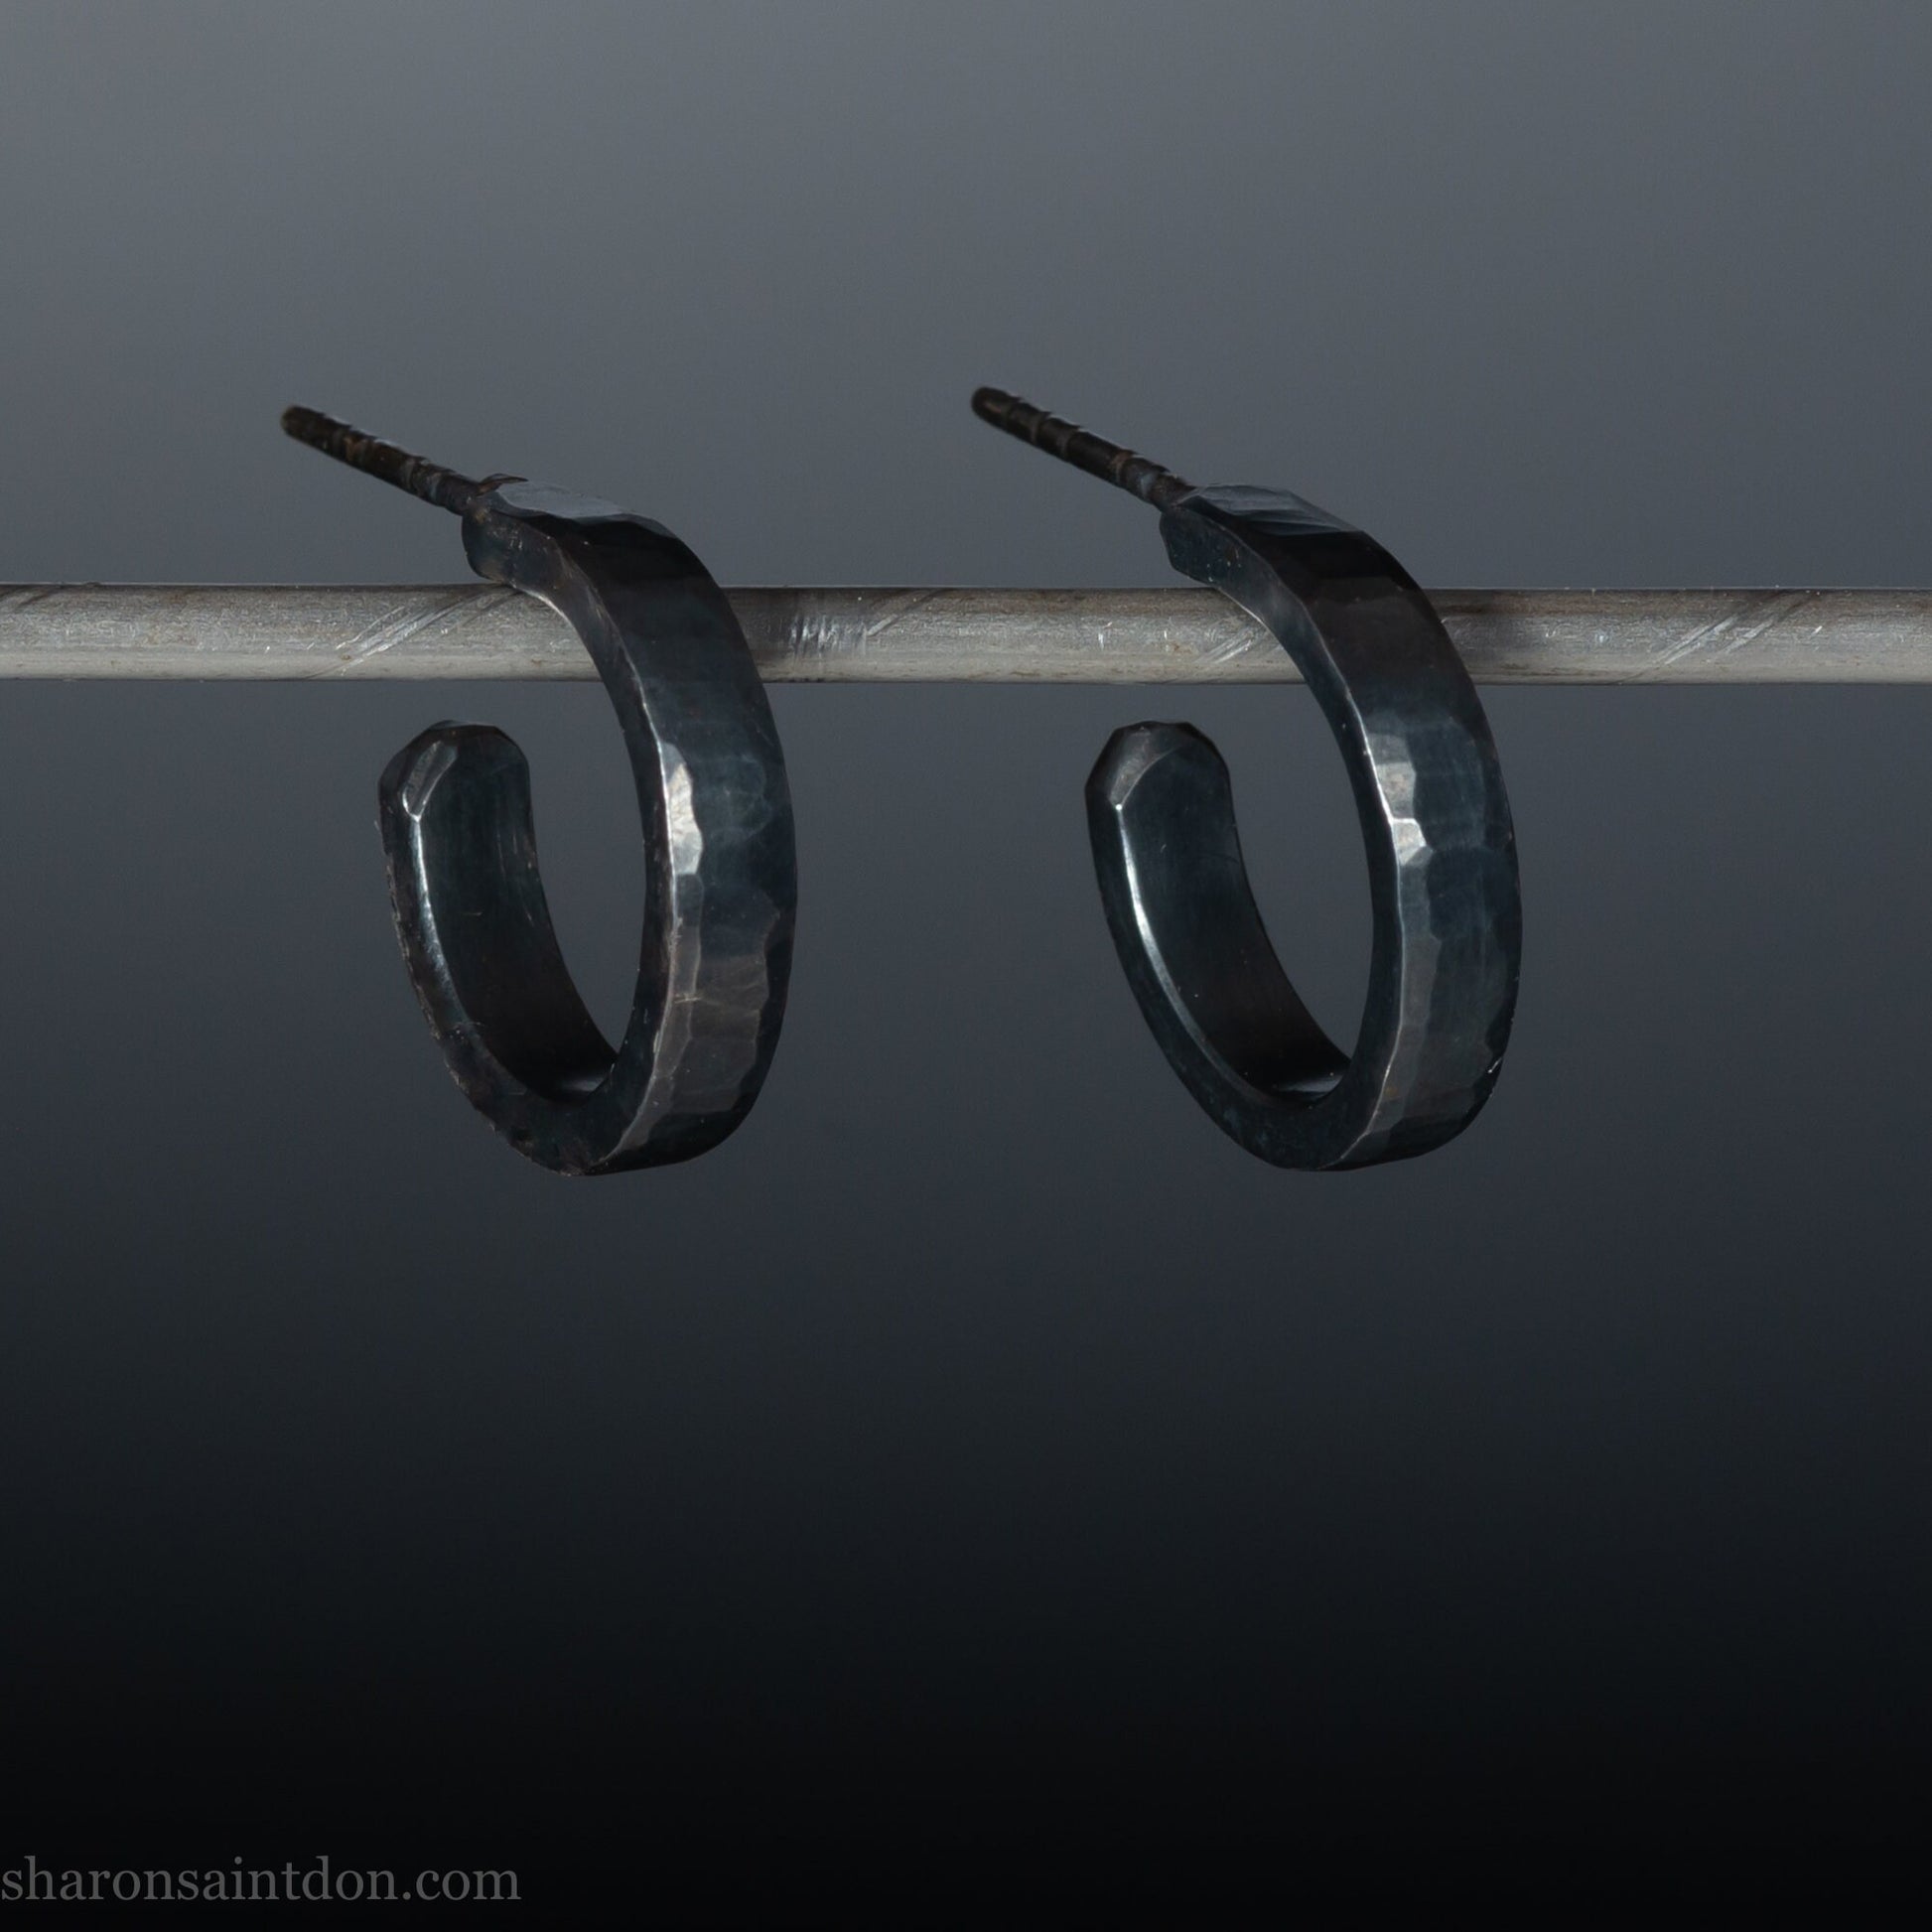 925 sterling silver hoop earrings for men or women, handmade in North America by Sharon SaintDon. 18mm diameter x 3mm wide, small, round, oxidized black with hammered texture.